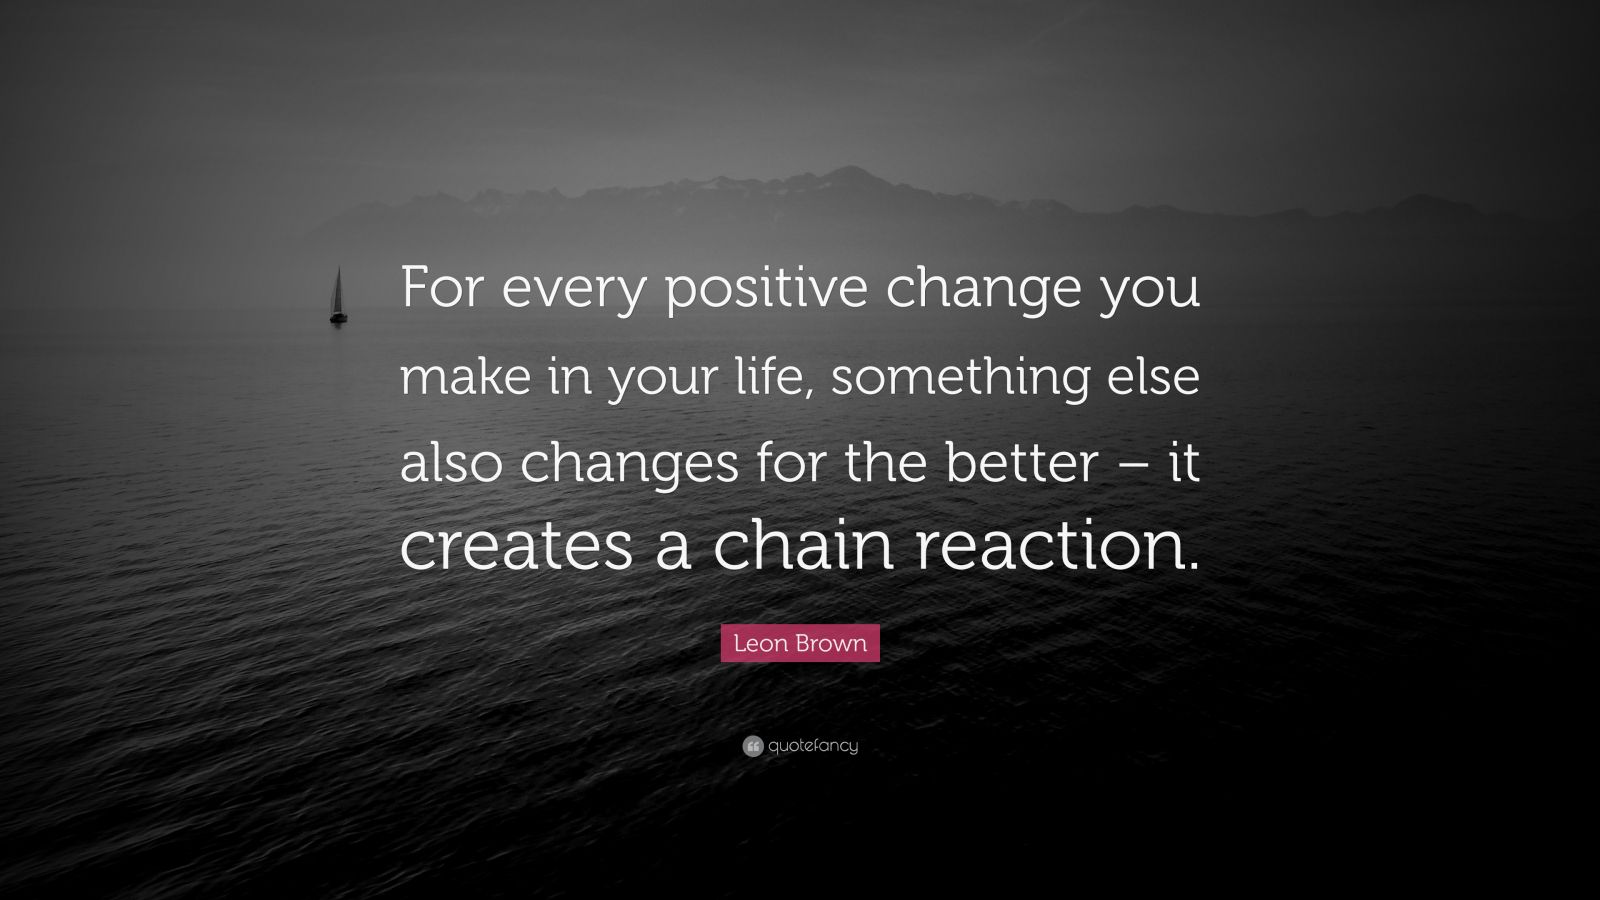 Leon Brown Quote: “For every positive change you make in your life